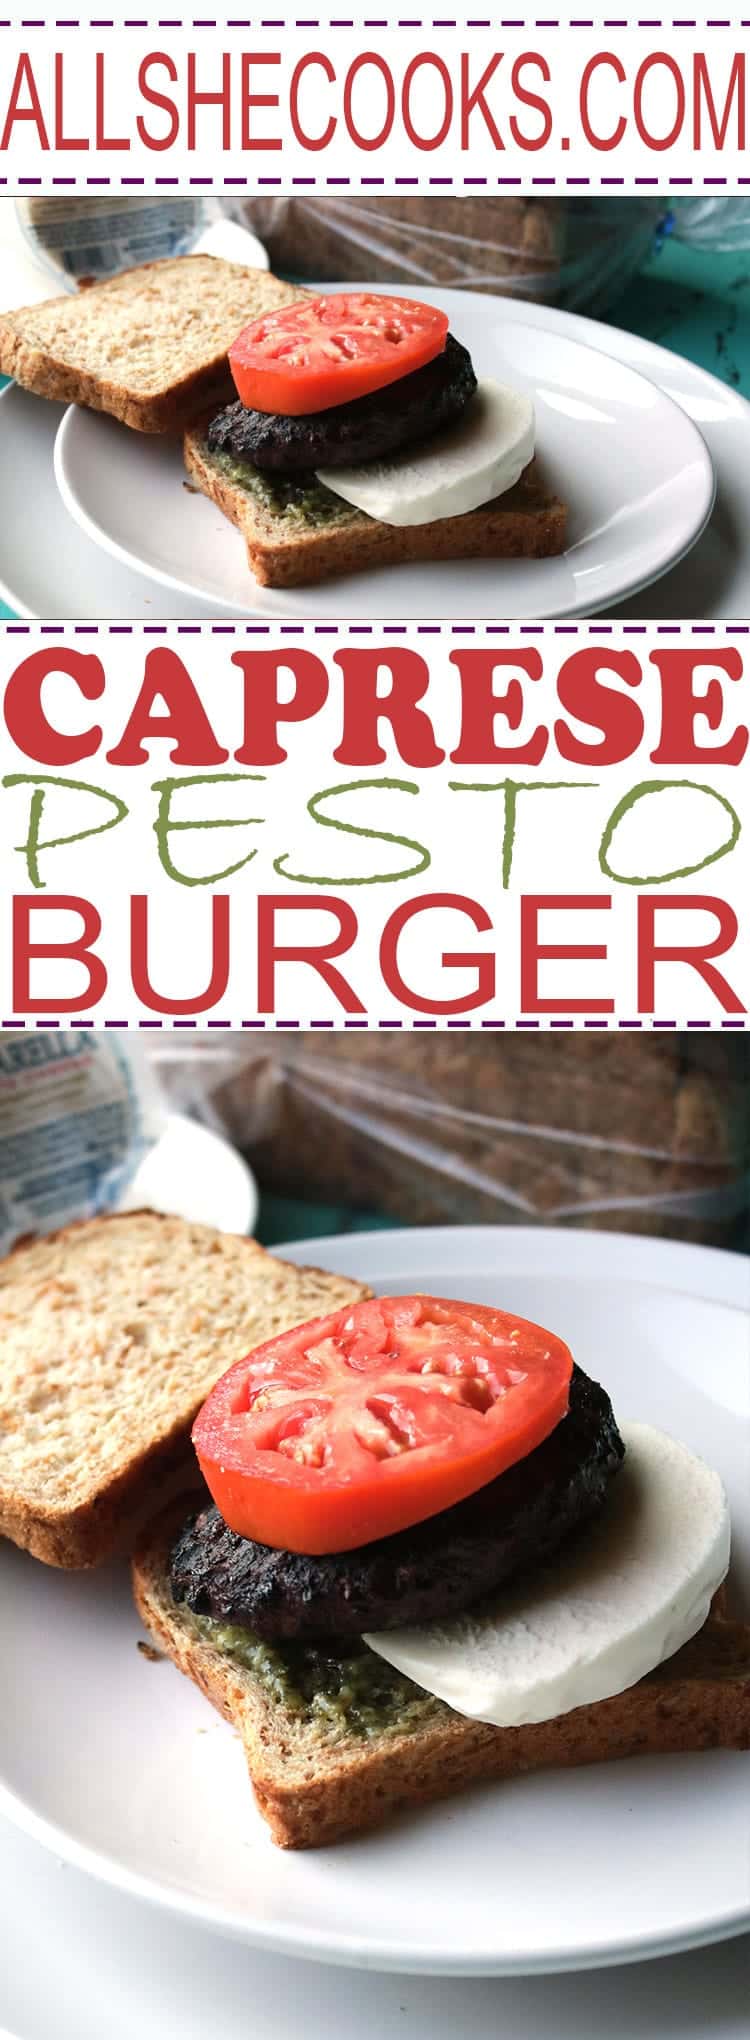 Tasty Caprese Pesto Burger recipe is easy to make and packed with layers of flavor you'll want to bite into. This weeknight dinner is simple and delicious.